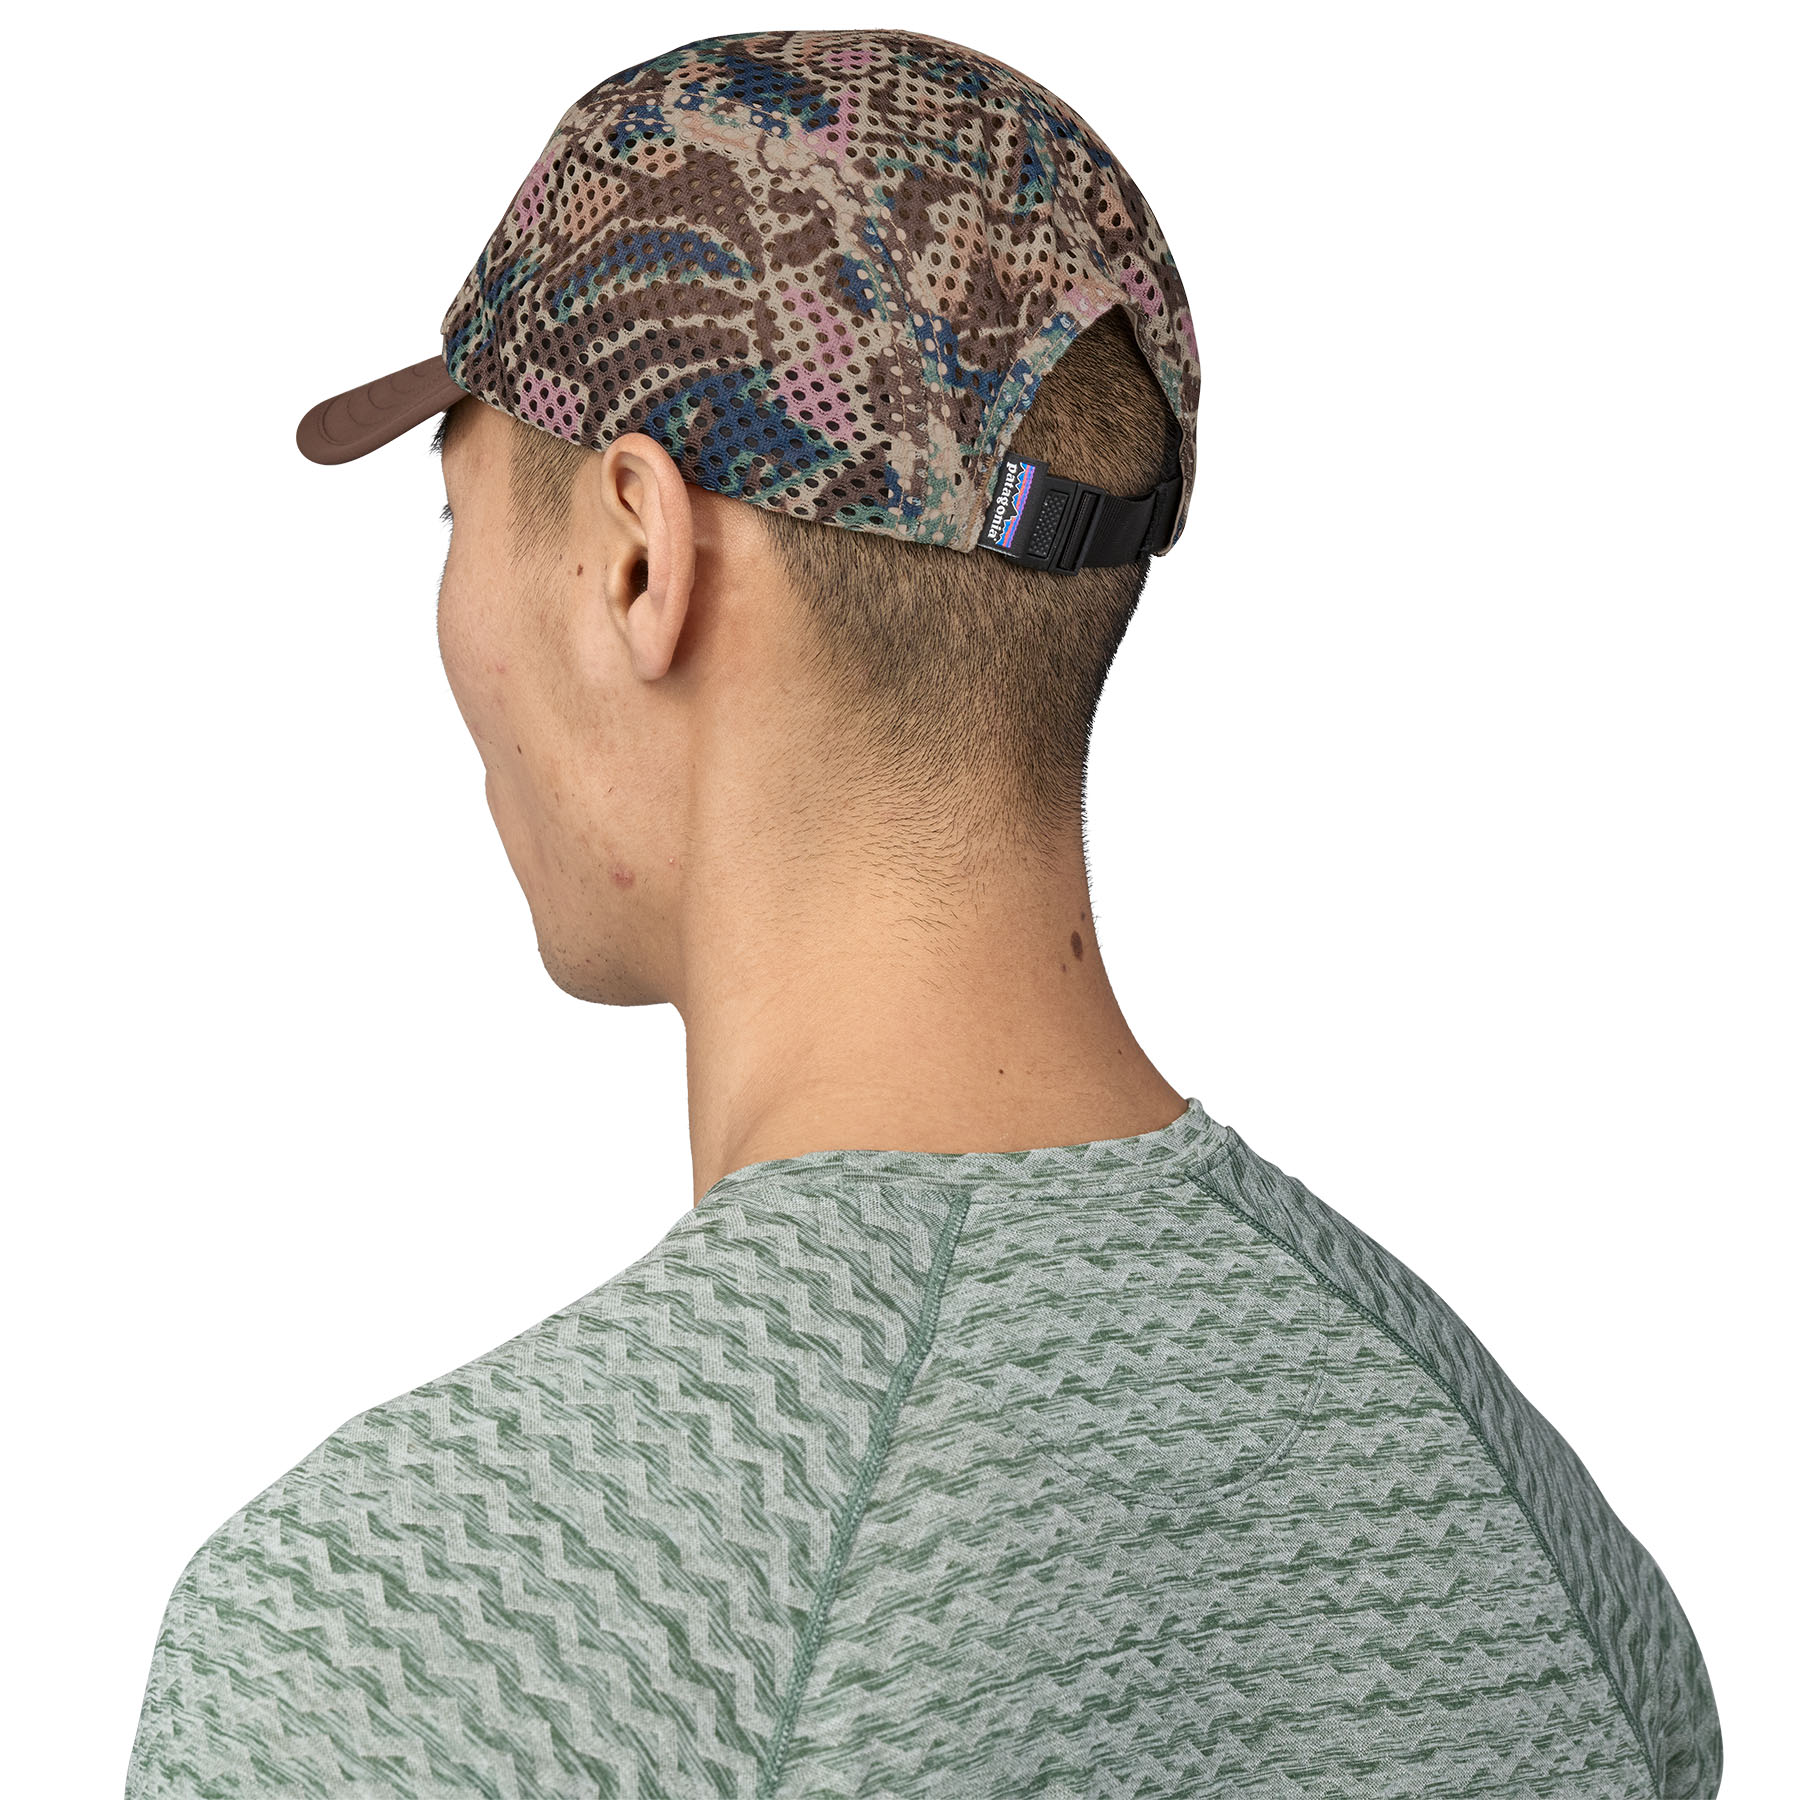 PATAGONIA Duckbill Cap Thriving Planet: Cone Brown